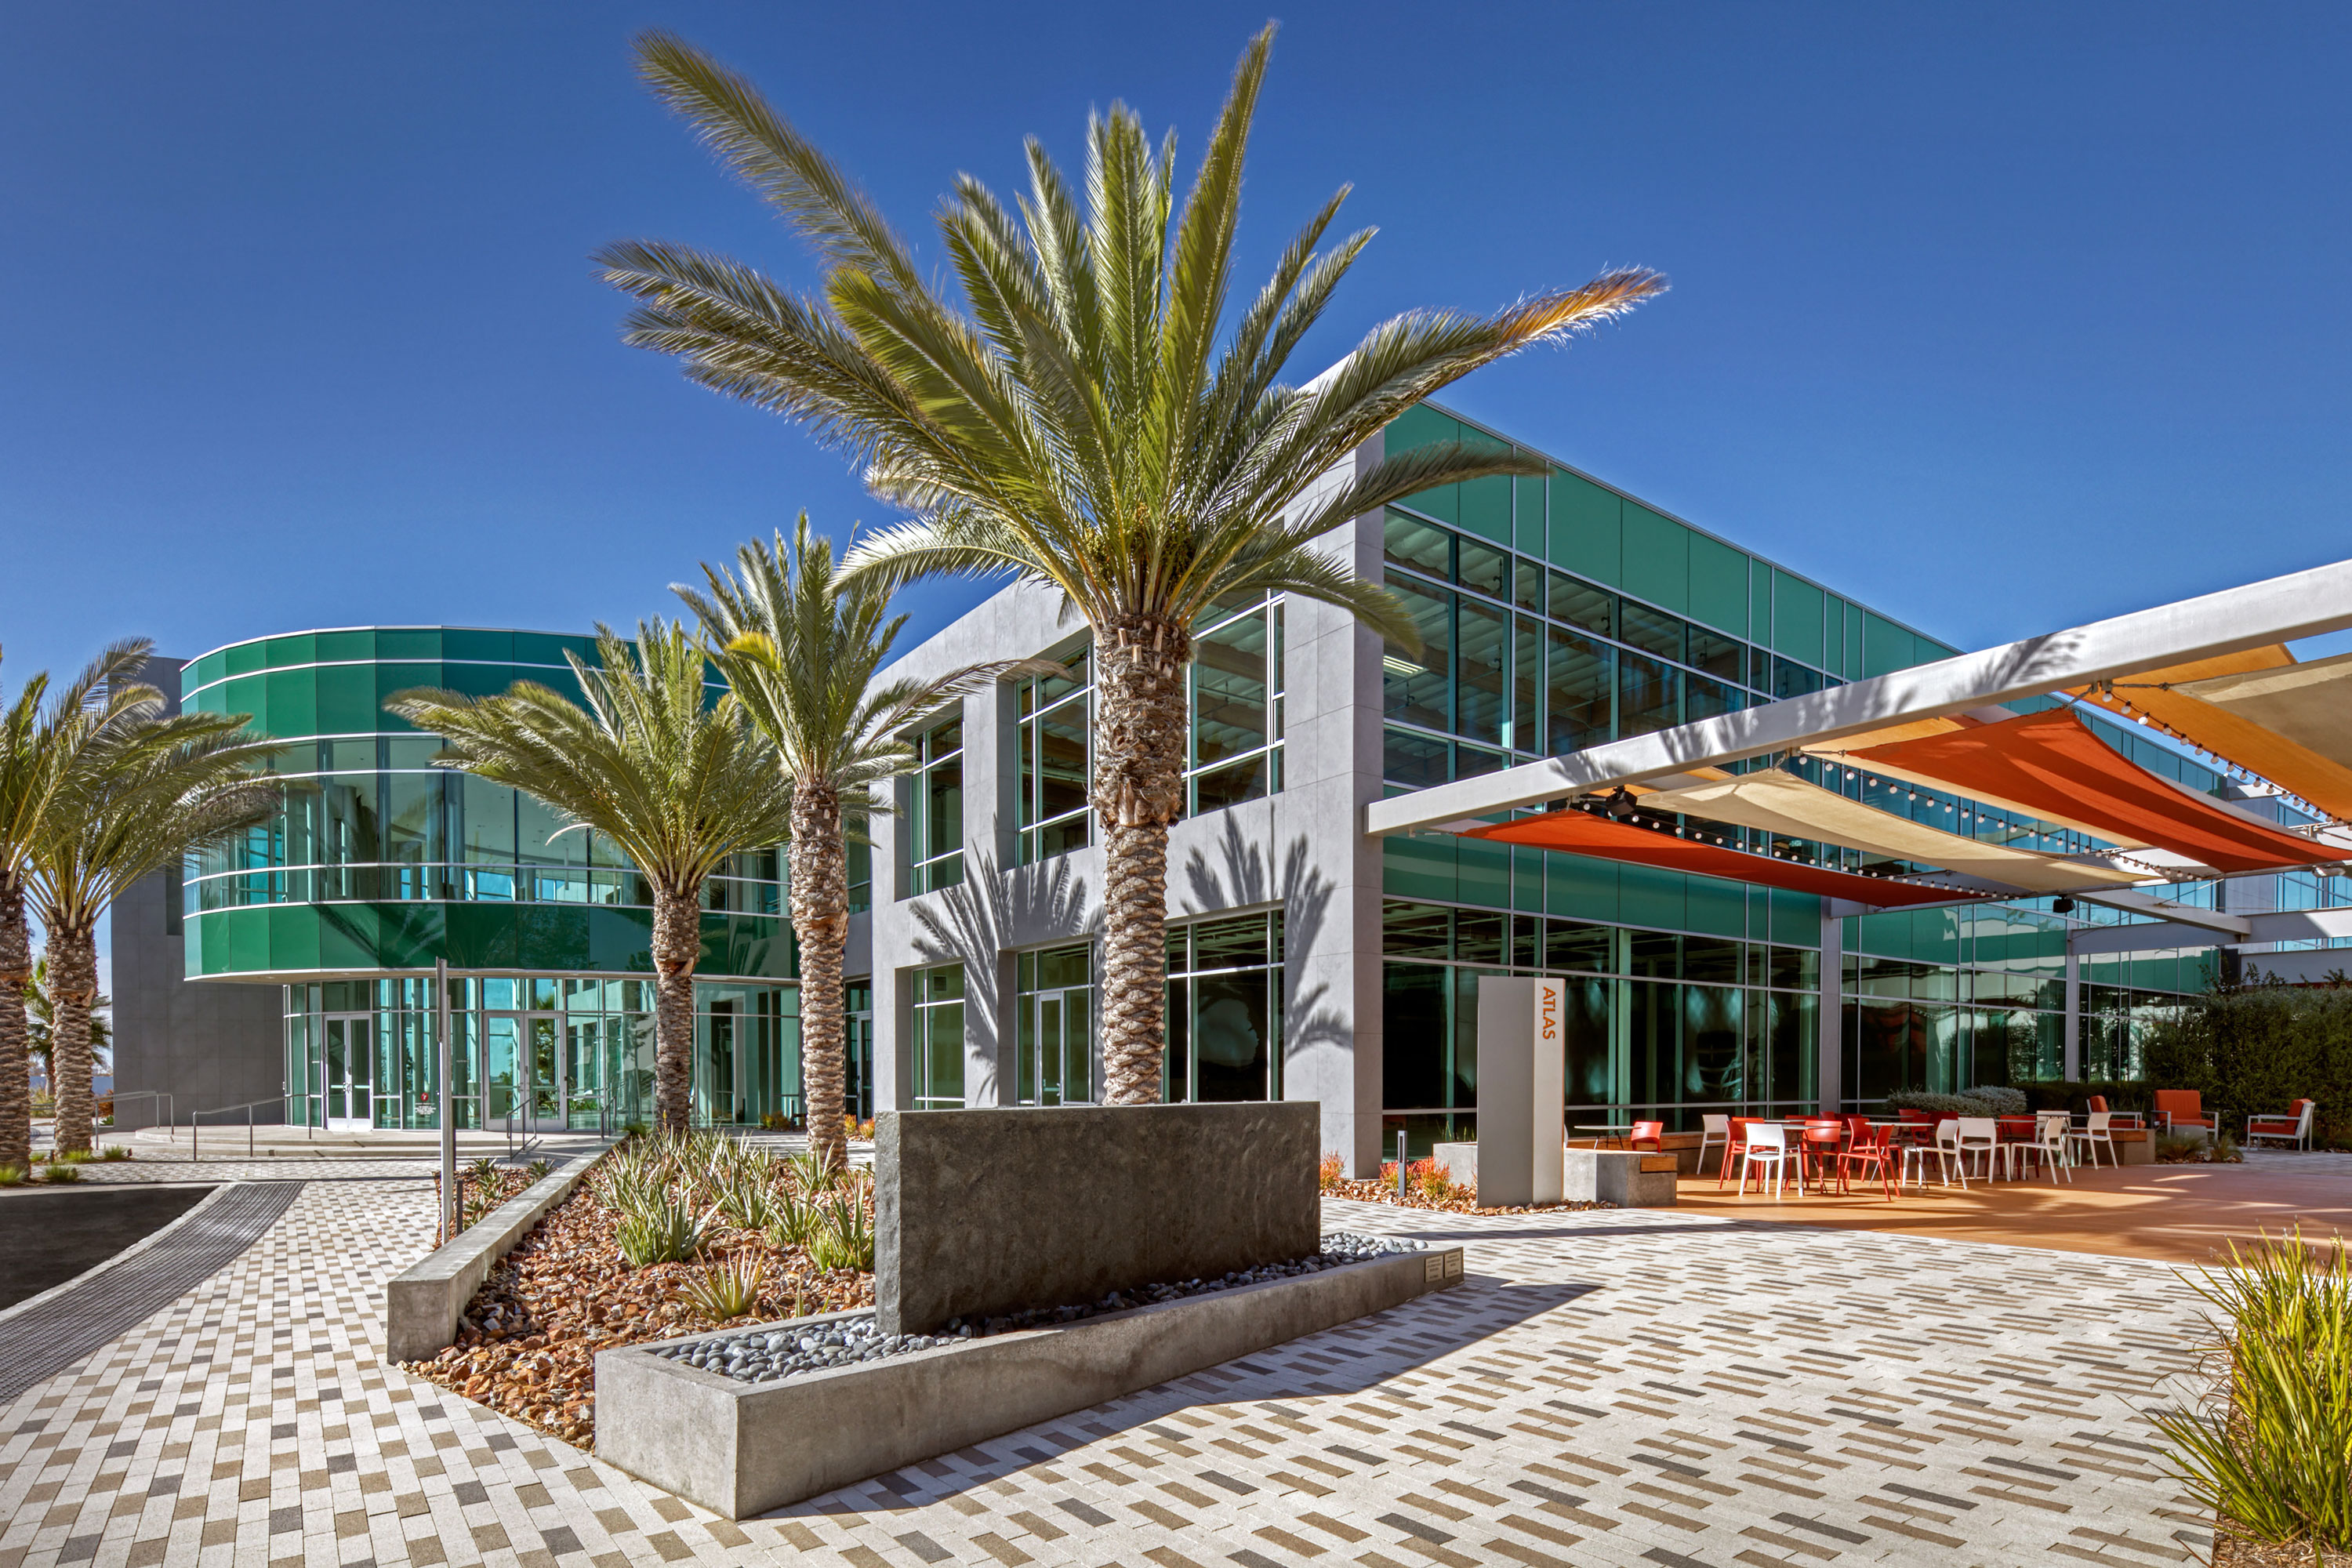 Office project in San Diego, California photographed by architecture photographer Alan Blakely.